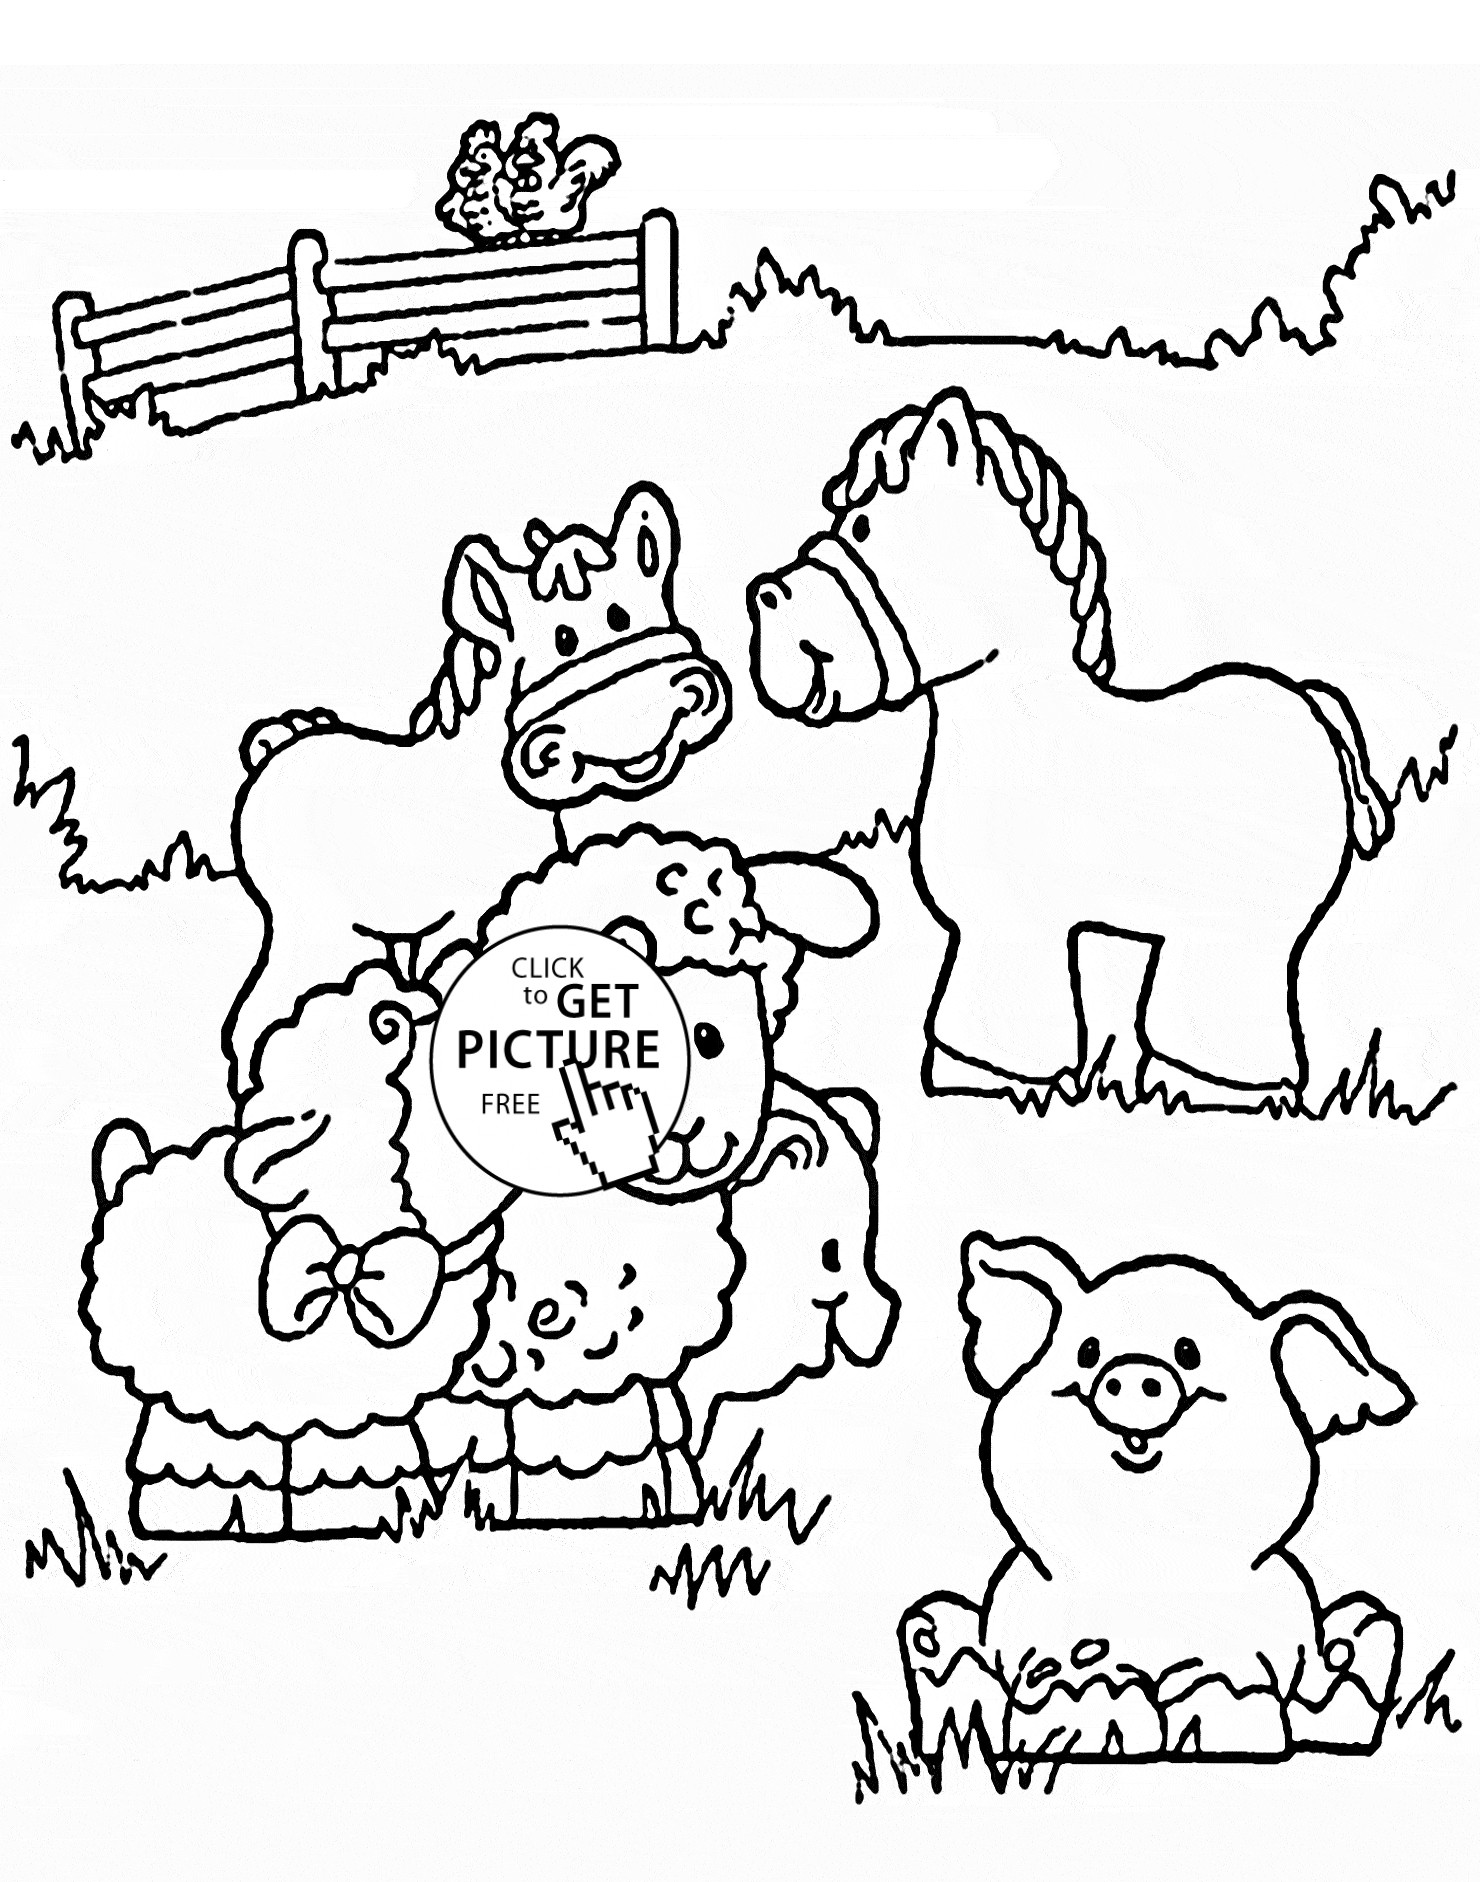 Funny Coloring Book For Kids Dabbing Creatures
 Funny Farm Animals Coloring Page for Kids Animal Coloring